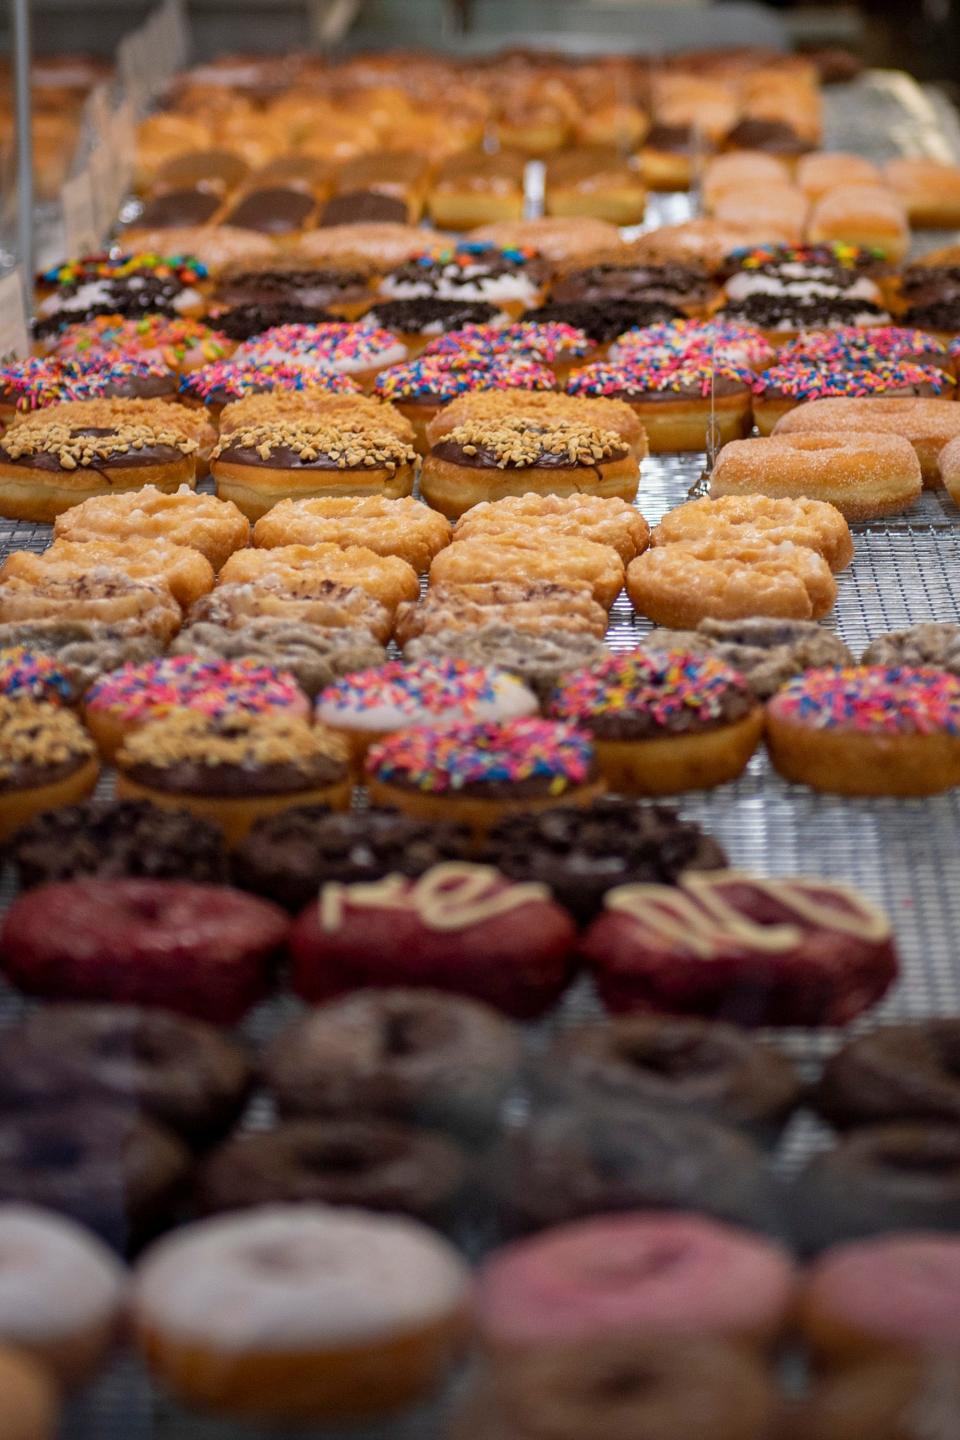 A display of doughnuts is pictured at Mr. Yo's new location in Fort Collins, Colo., on Tuesday, Aug. 9, 2022.  Owners Hyo and Susanna Jang recently expanded their business into Fort Collins with a new location at 1335 W. Elizabeth St.